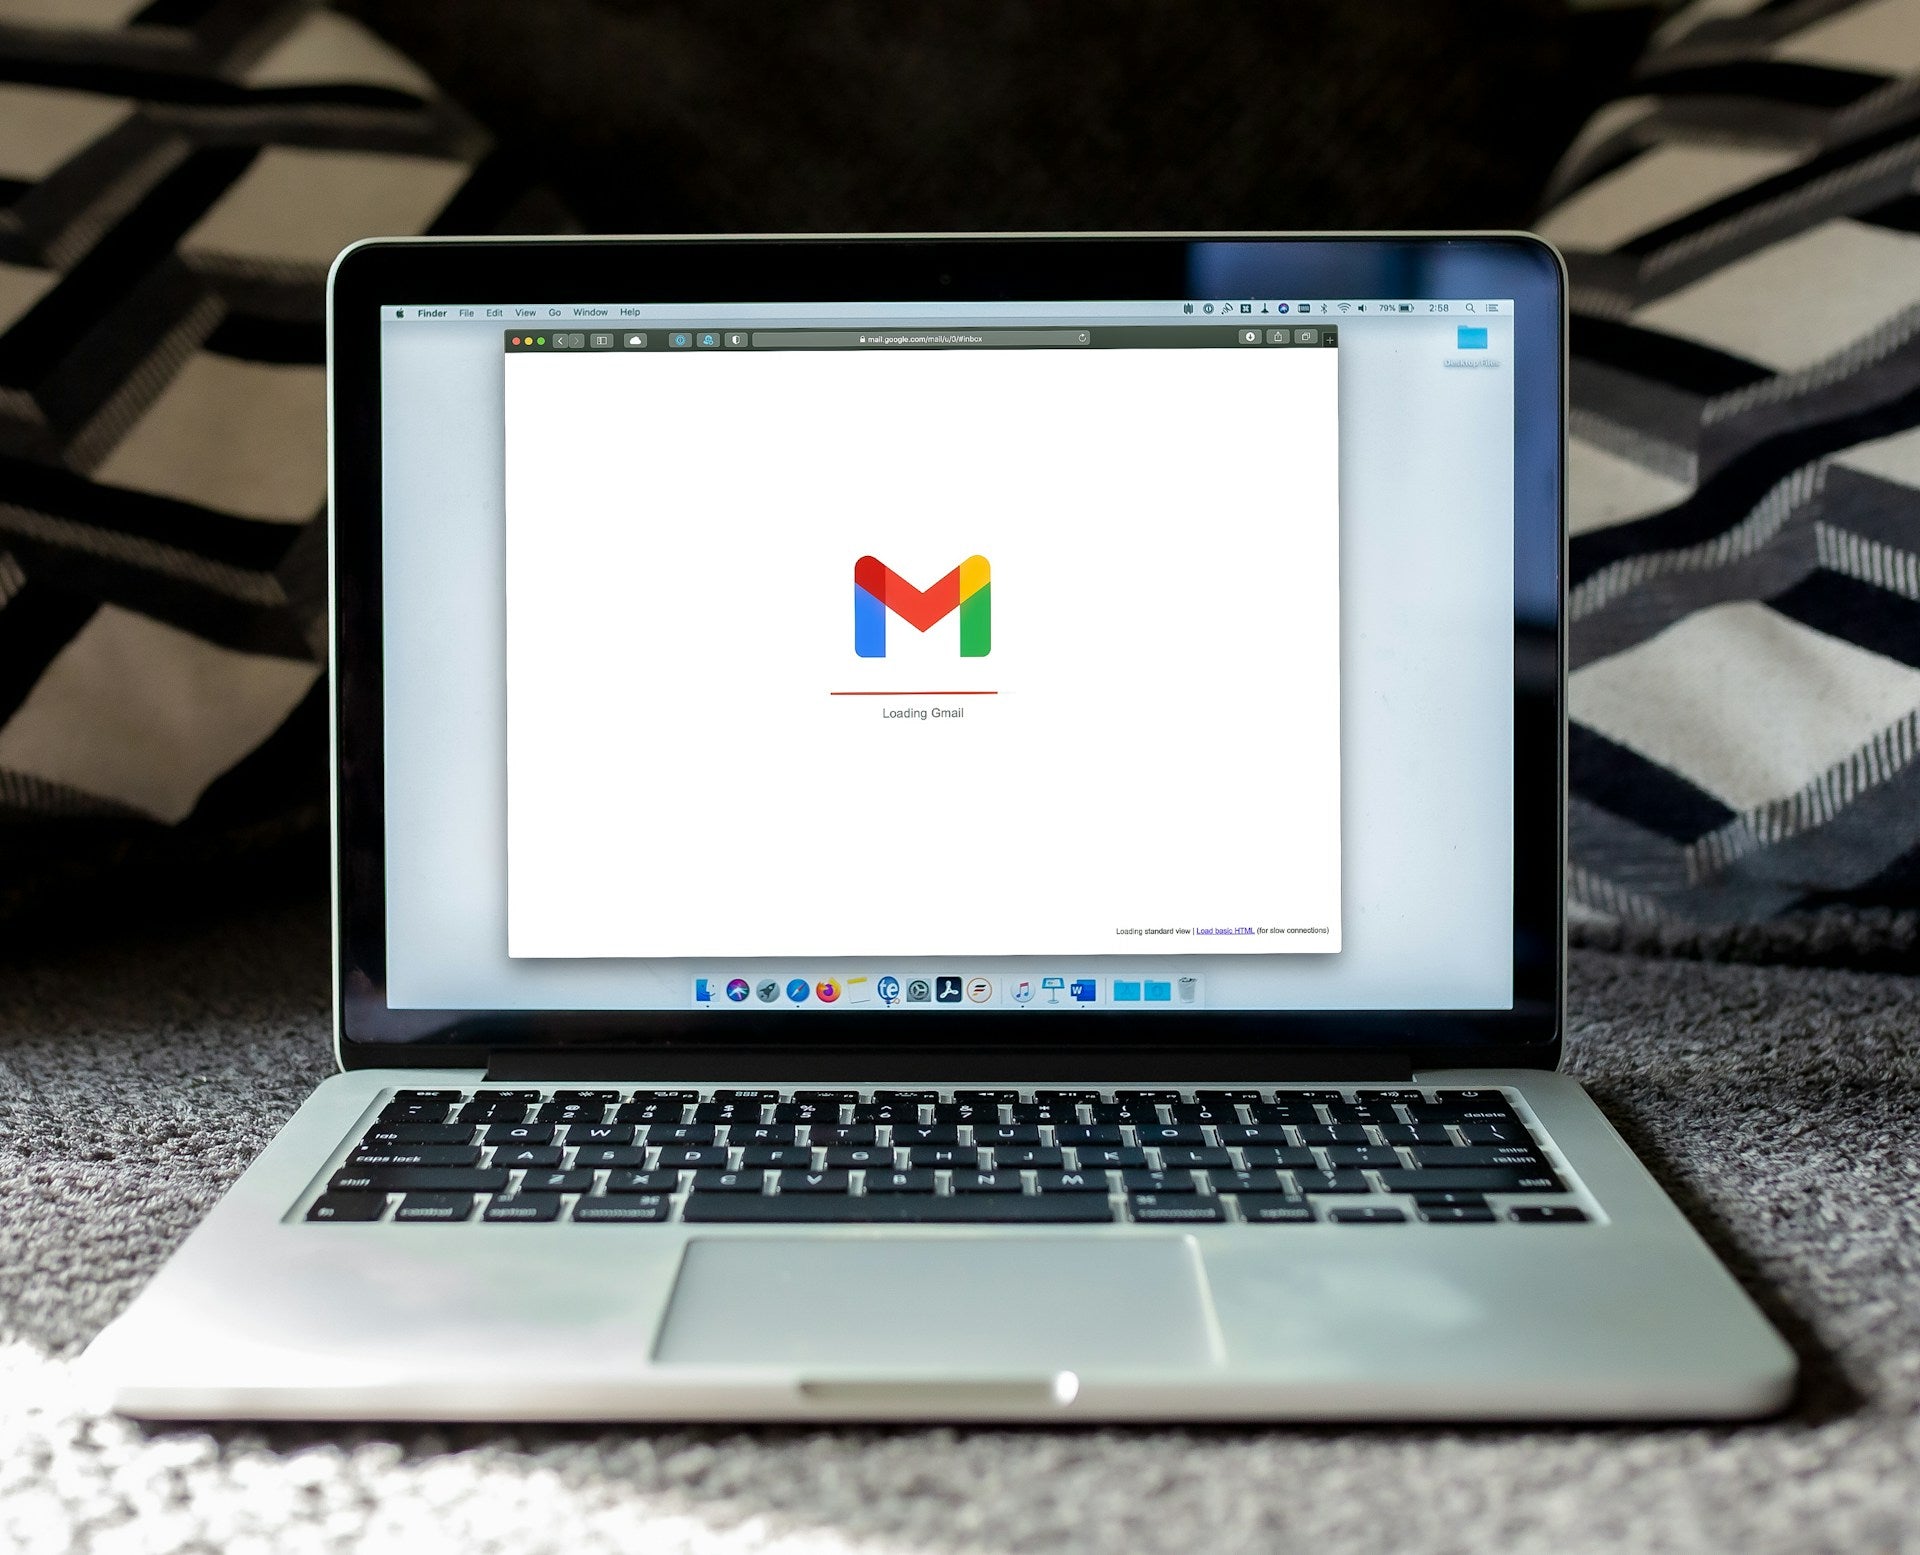 How to add an Image to an Email in Google Mail